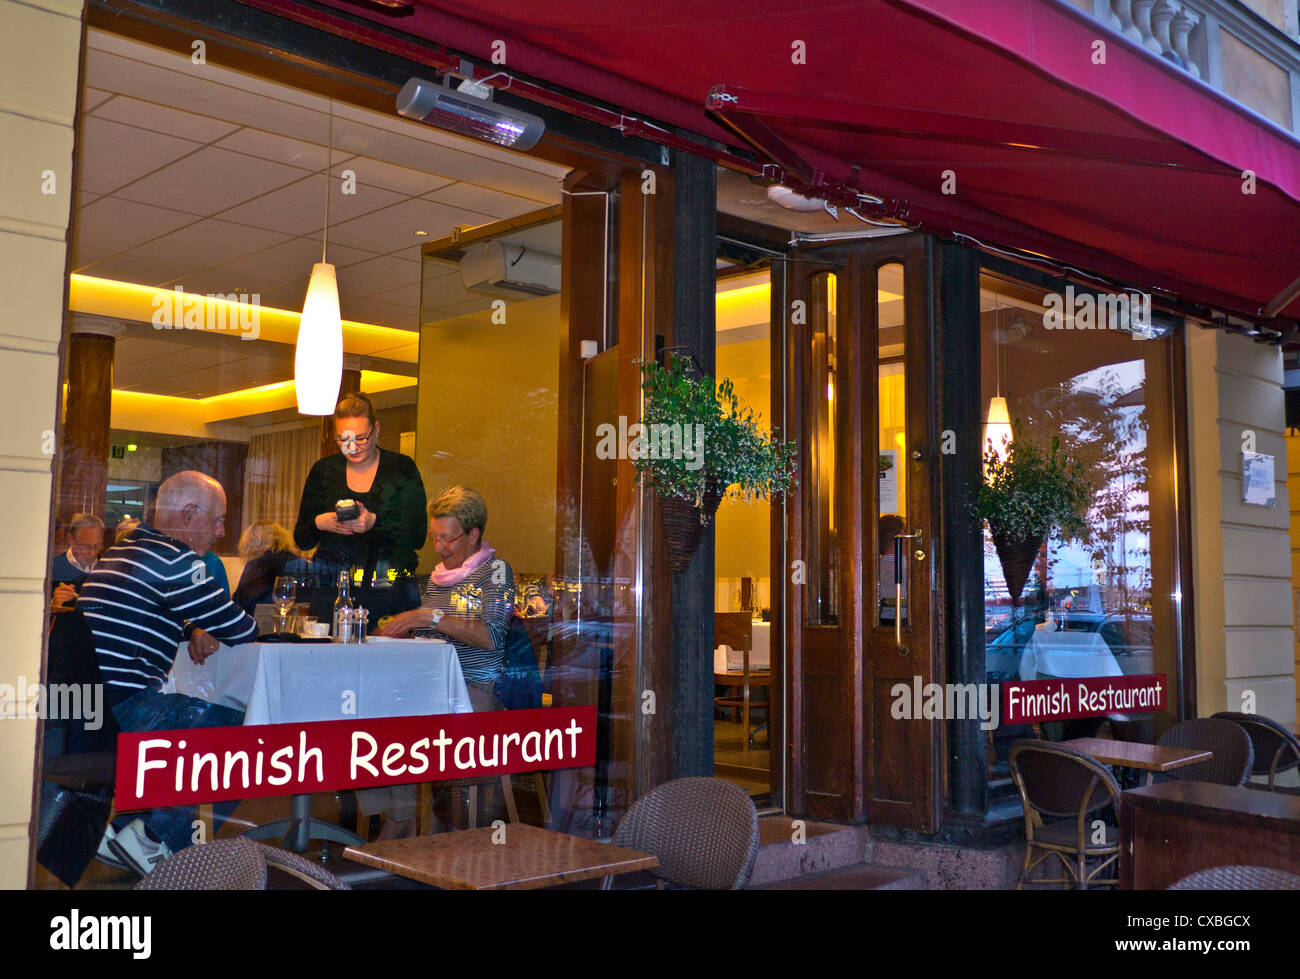 Finnish Restaurant Aino an authentic luxury Finnish dining experience in central Helsinki Stock Photo